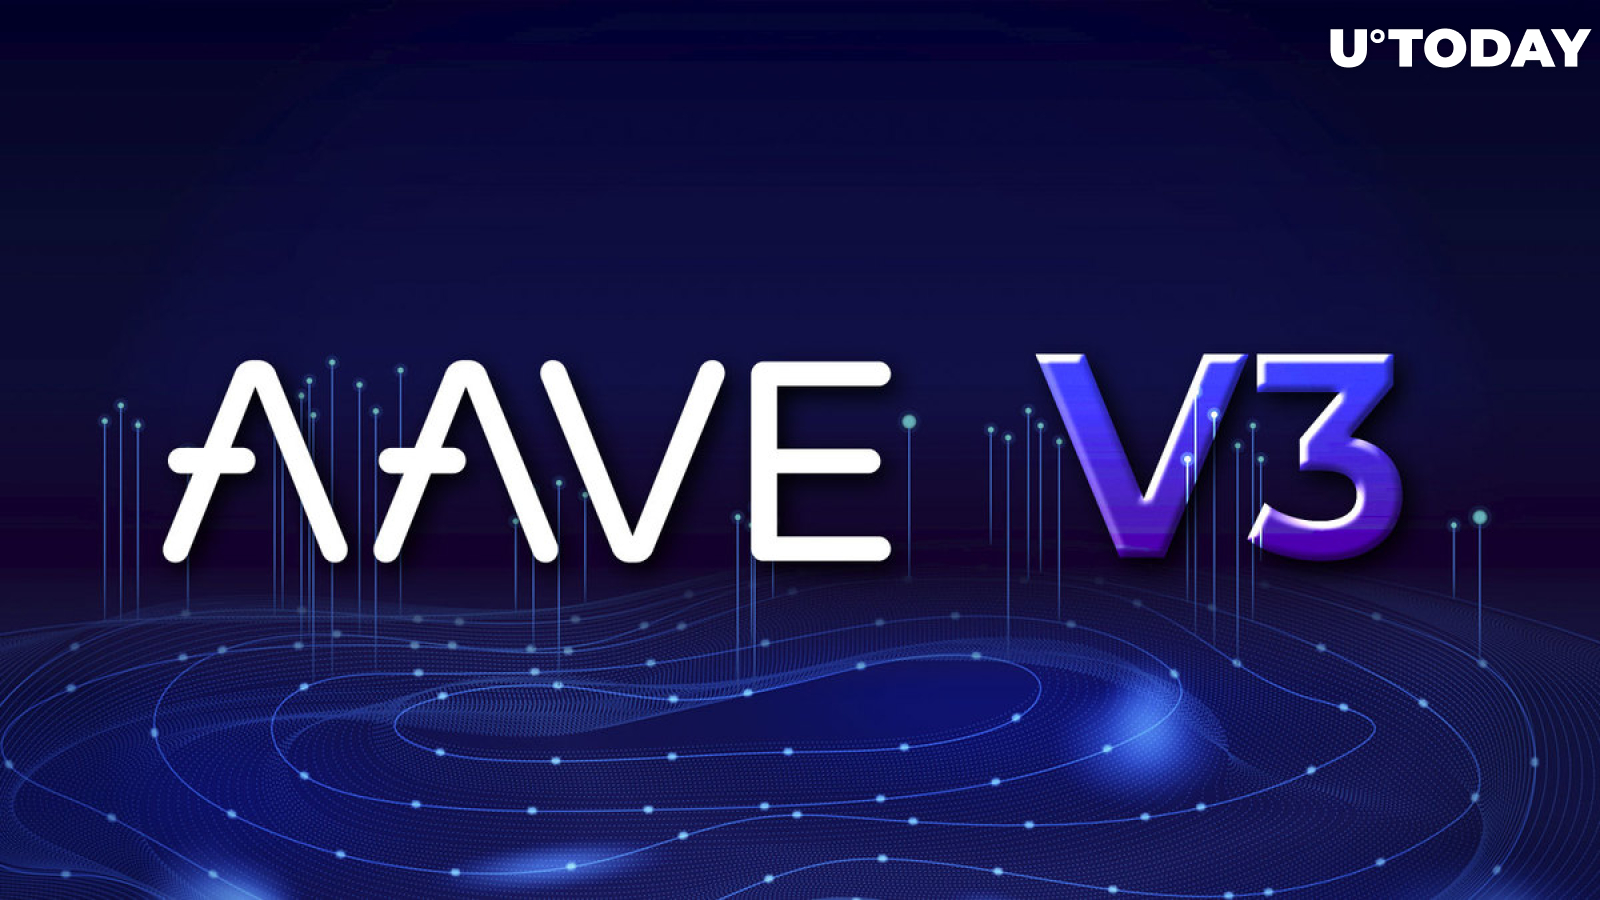 Aave V3 Explained: Everything You Need to Know